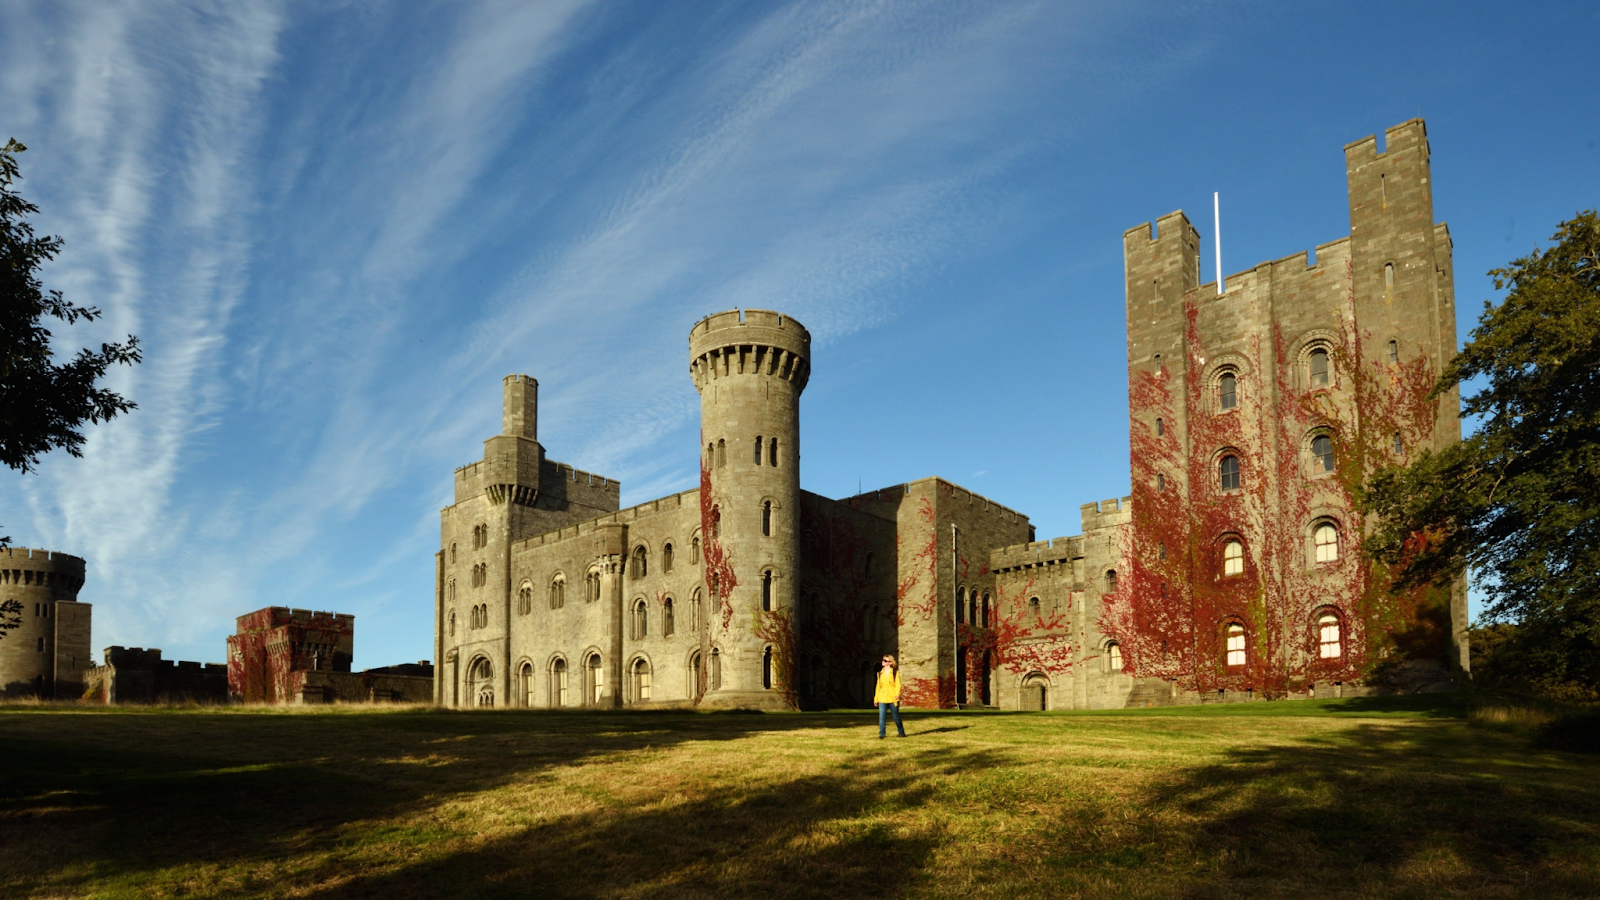 An image showing Penrhyn Castle, a National Trust site